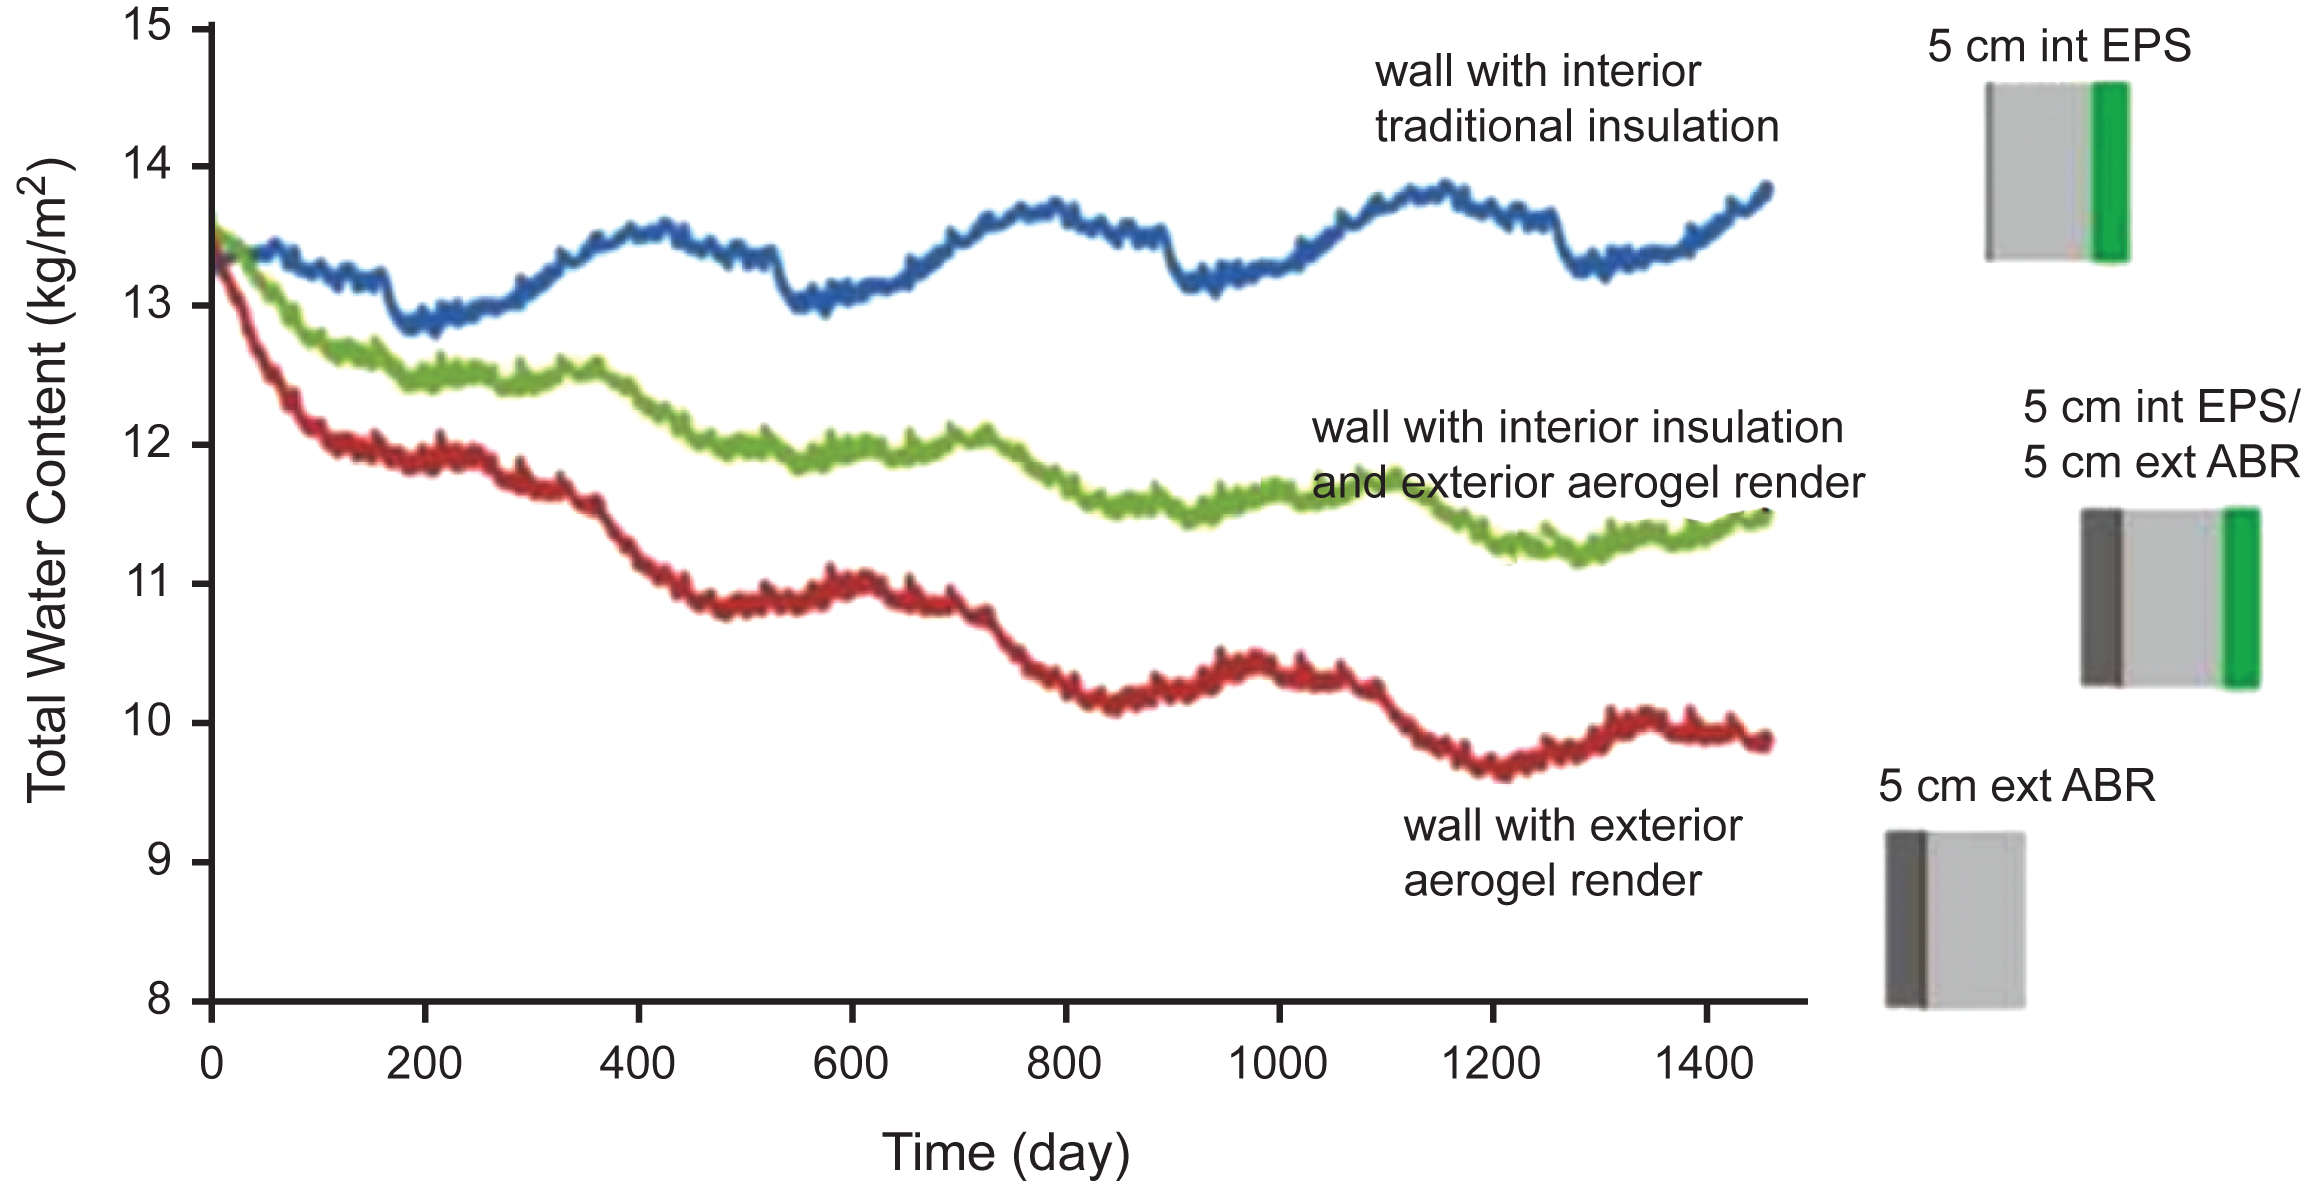 Evolution of the total water content over the 4 years for the different insulation configurations.